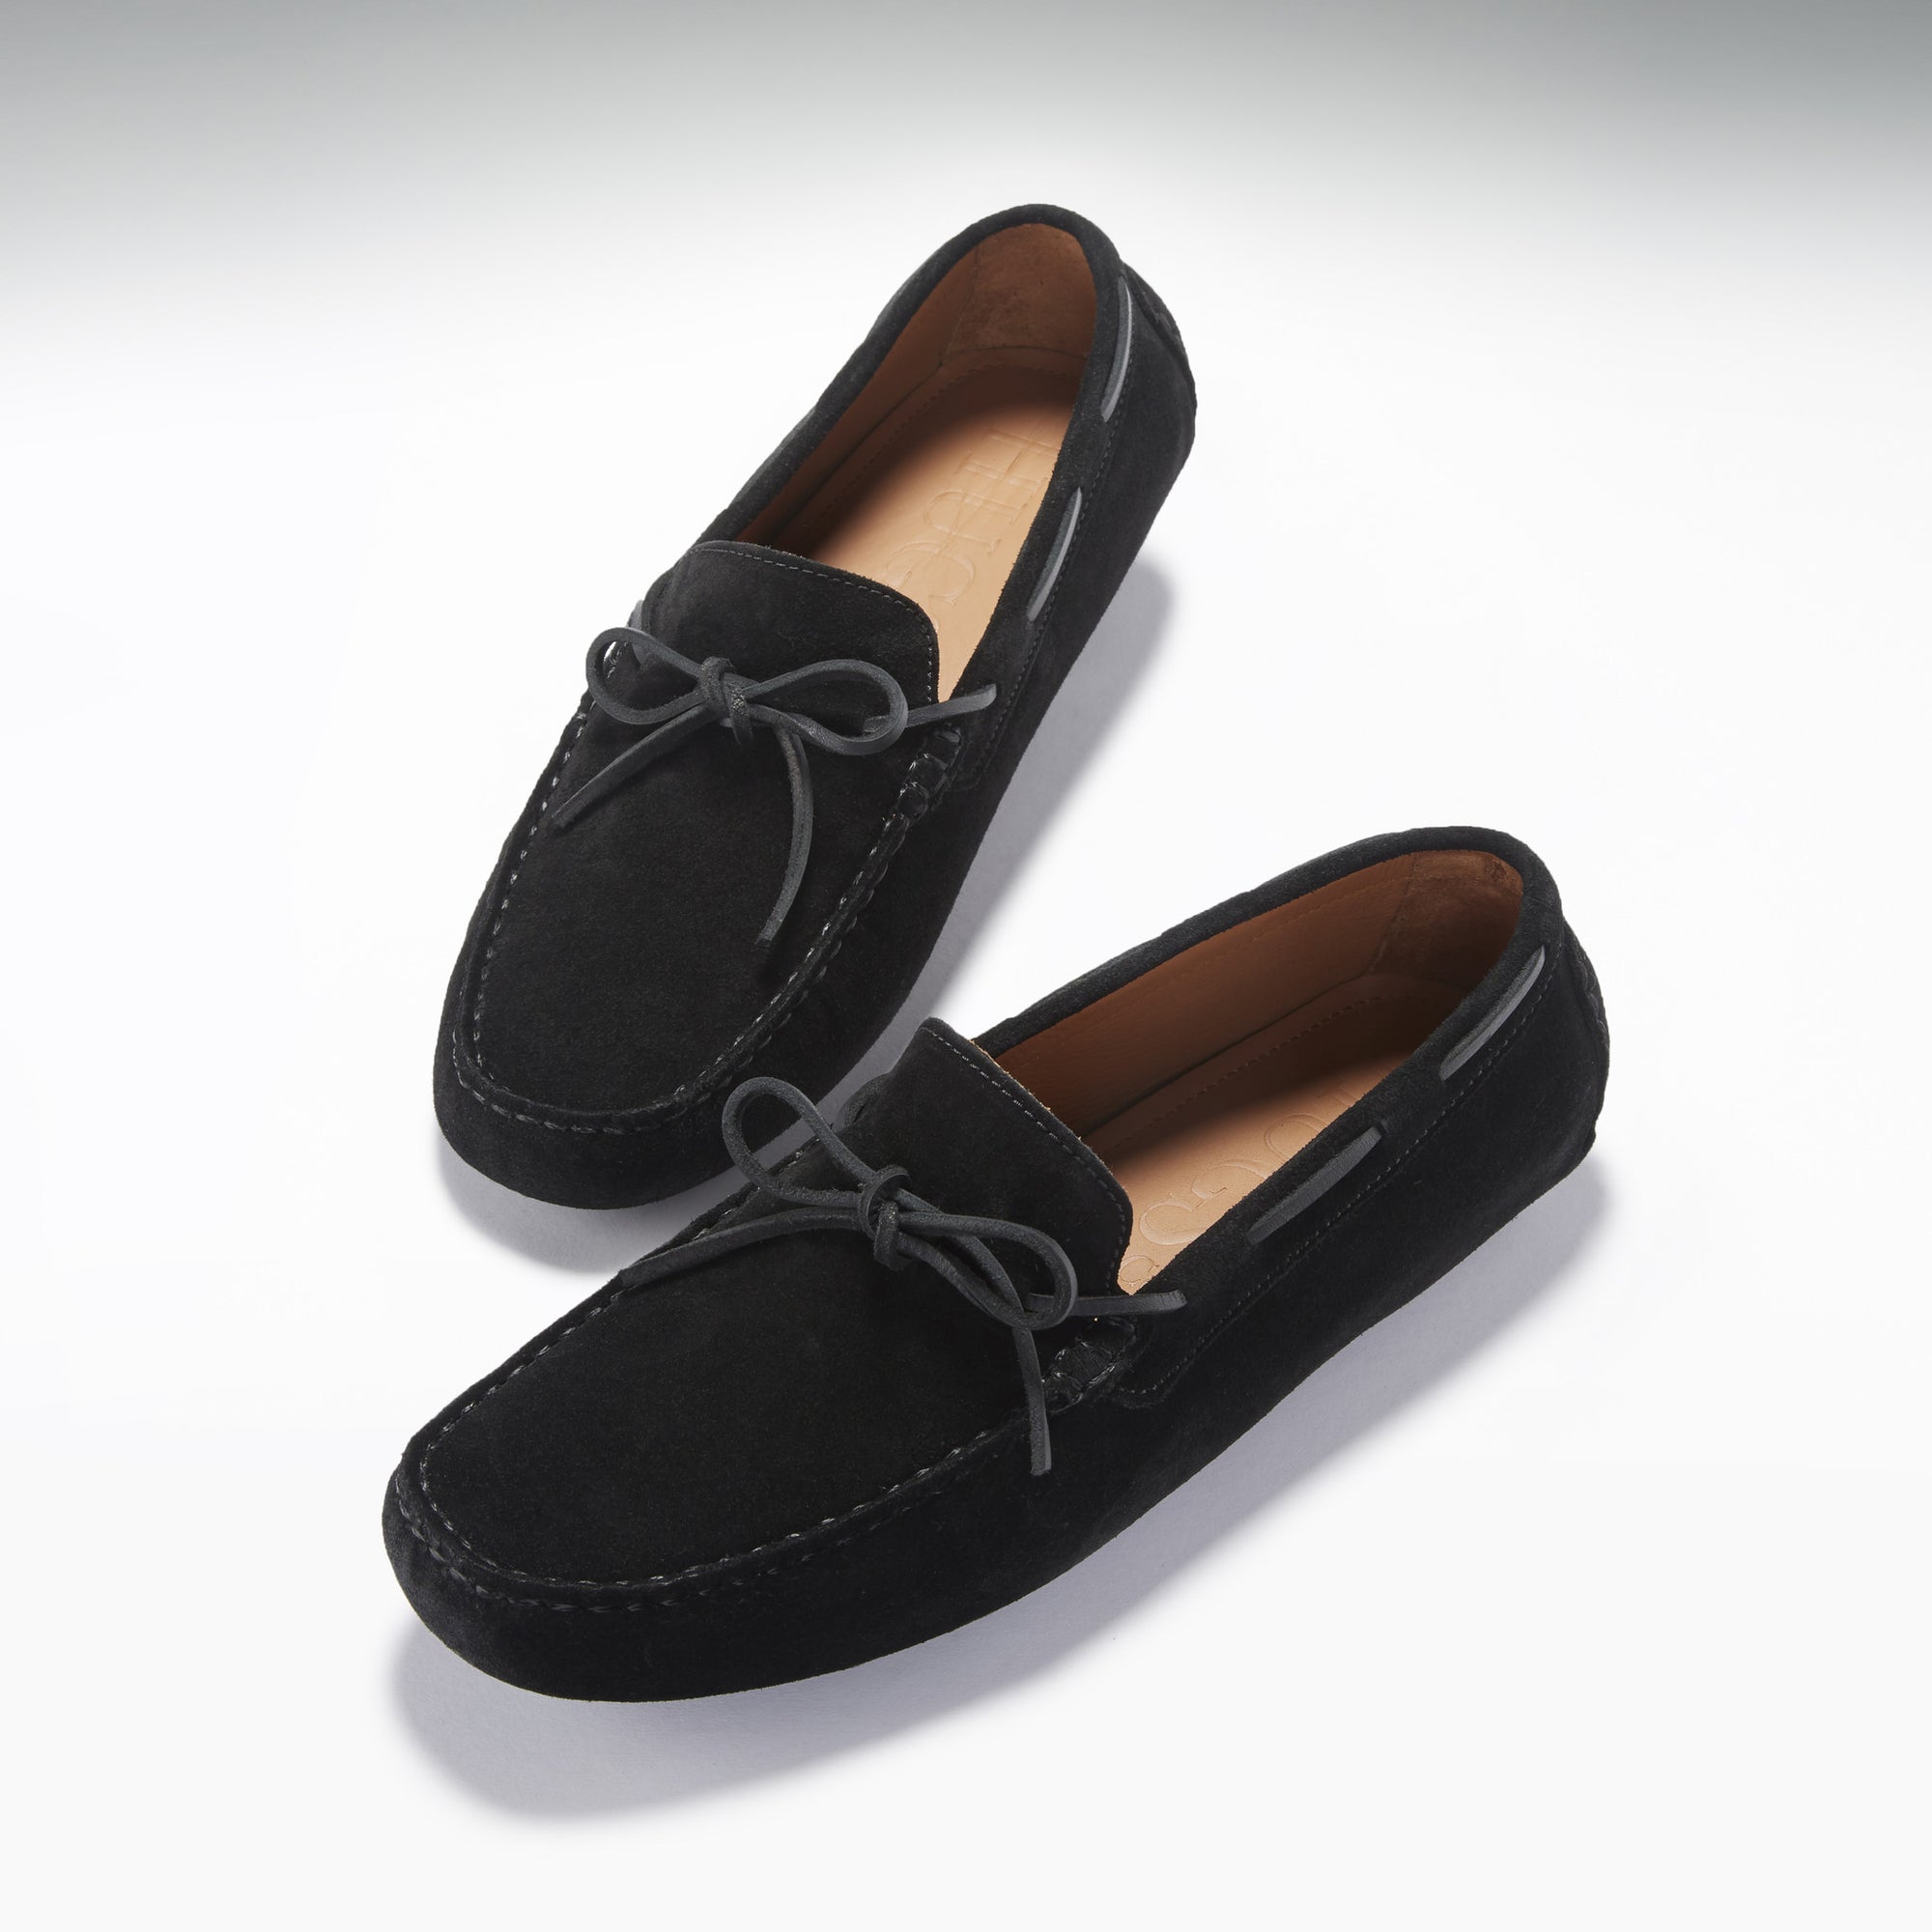 Laced Driving Loafers, Black Suede, Hugs & Co. Front